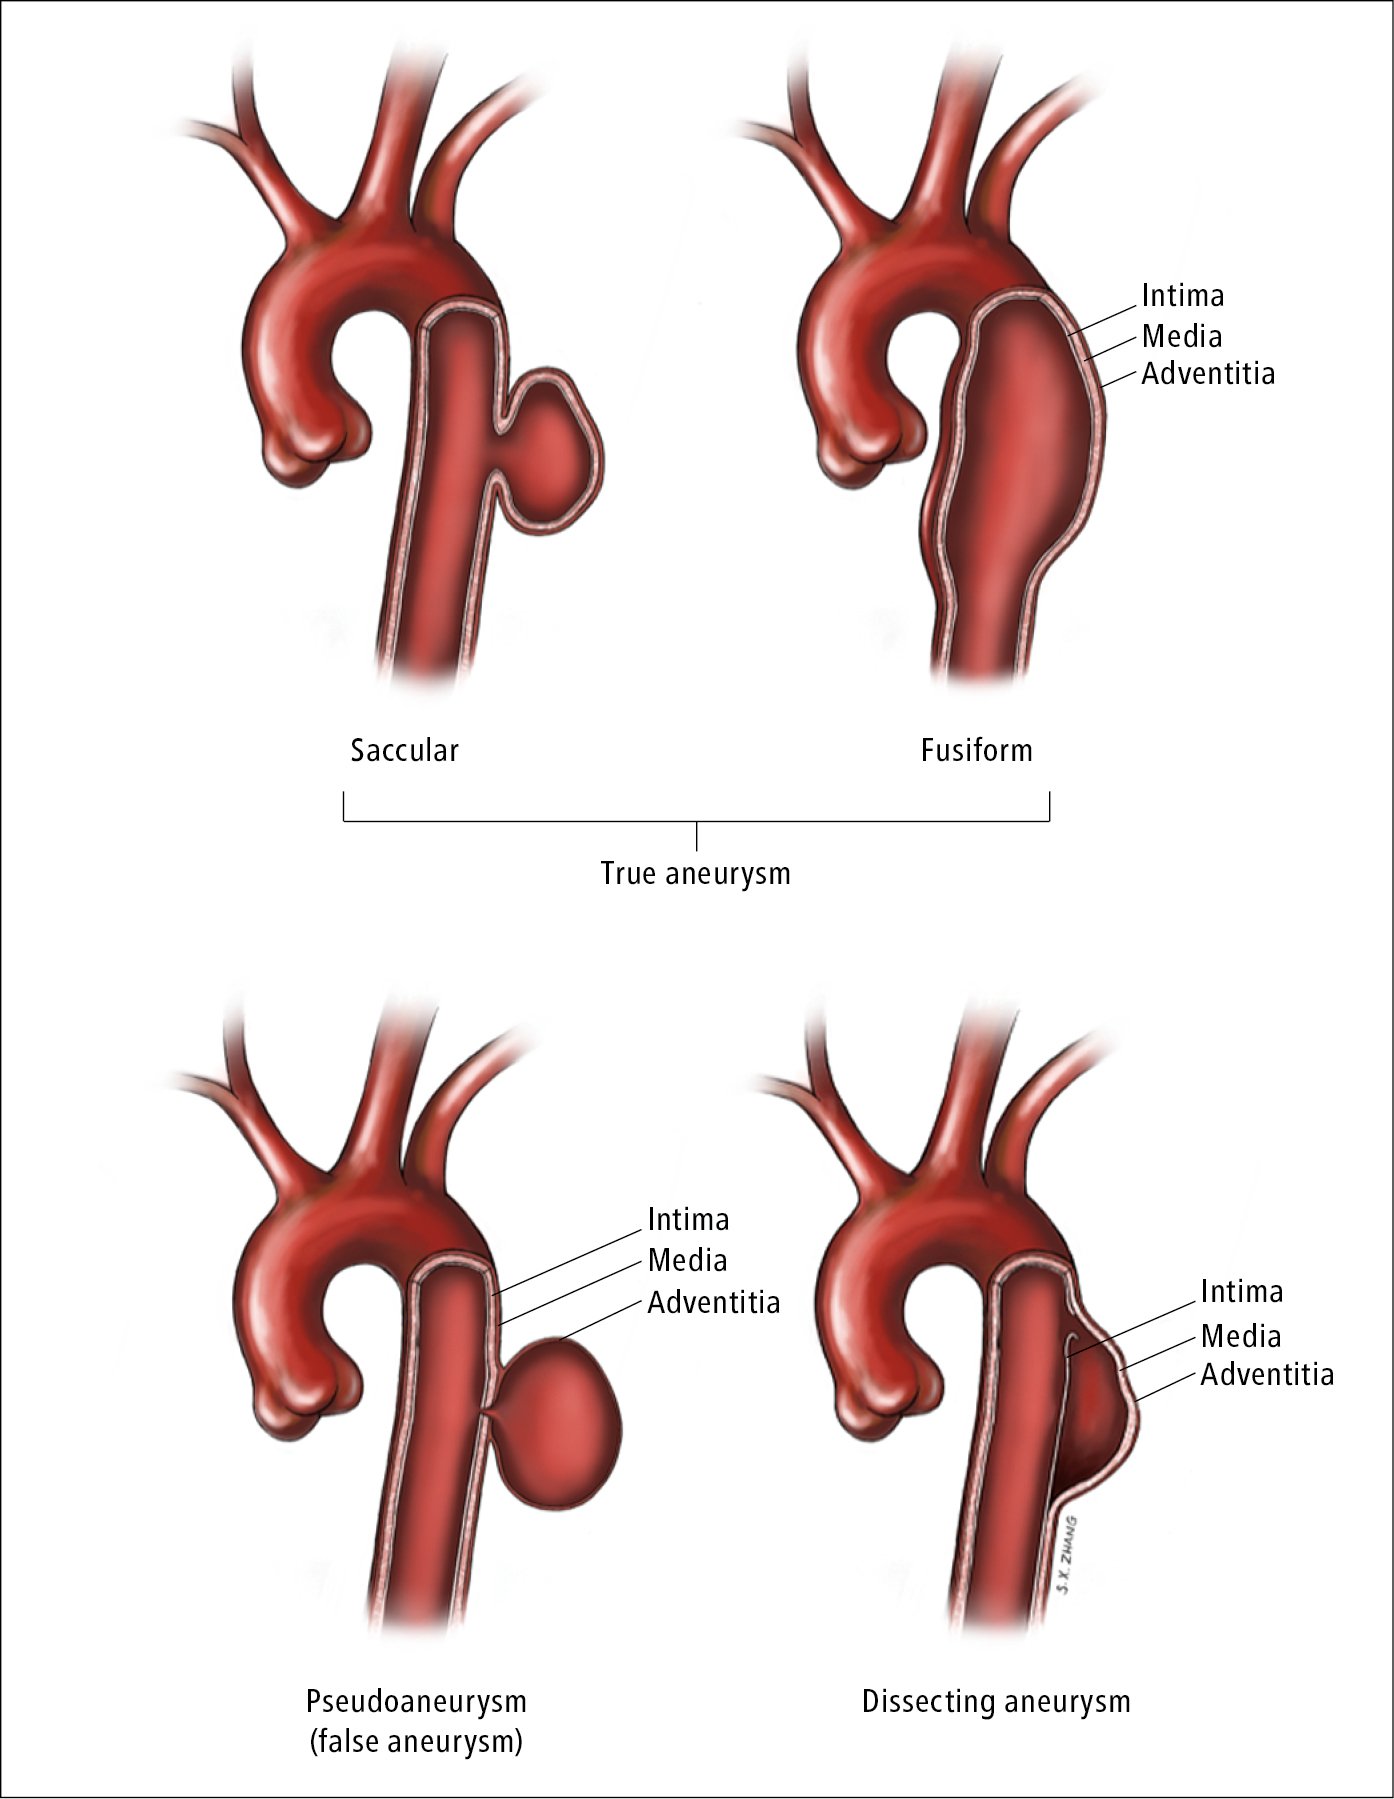 Figure 031_2580.  Different types of aortic aneurysm.  Illustration courtesy of Dr Shannon Zhang.  